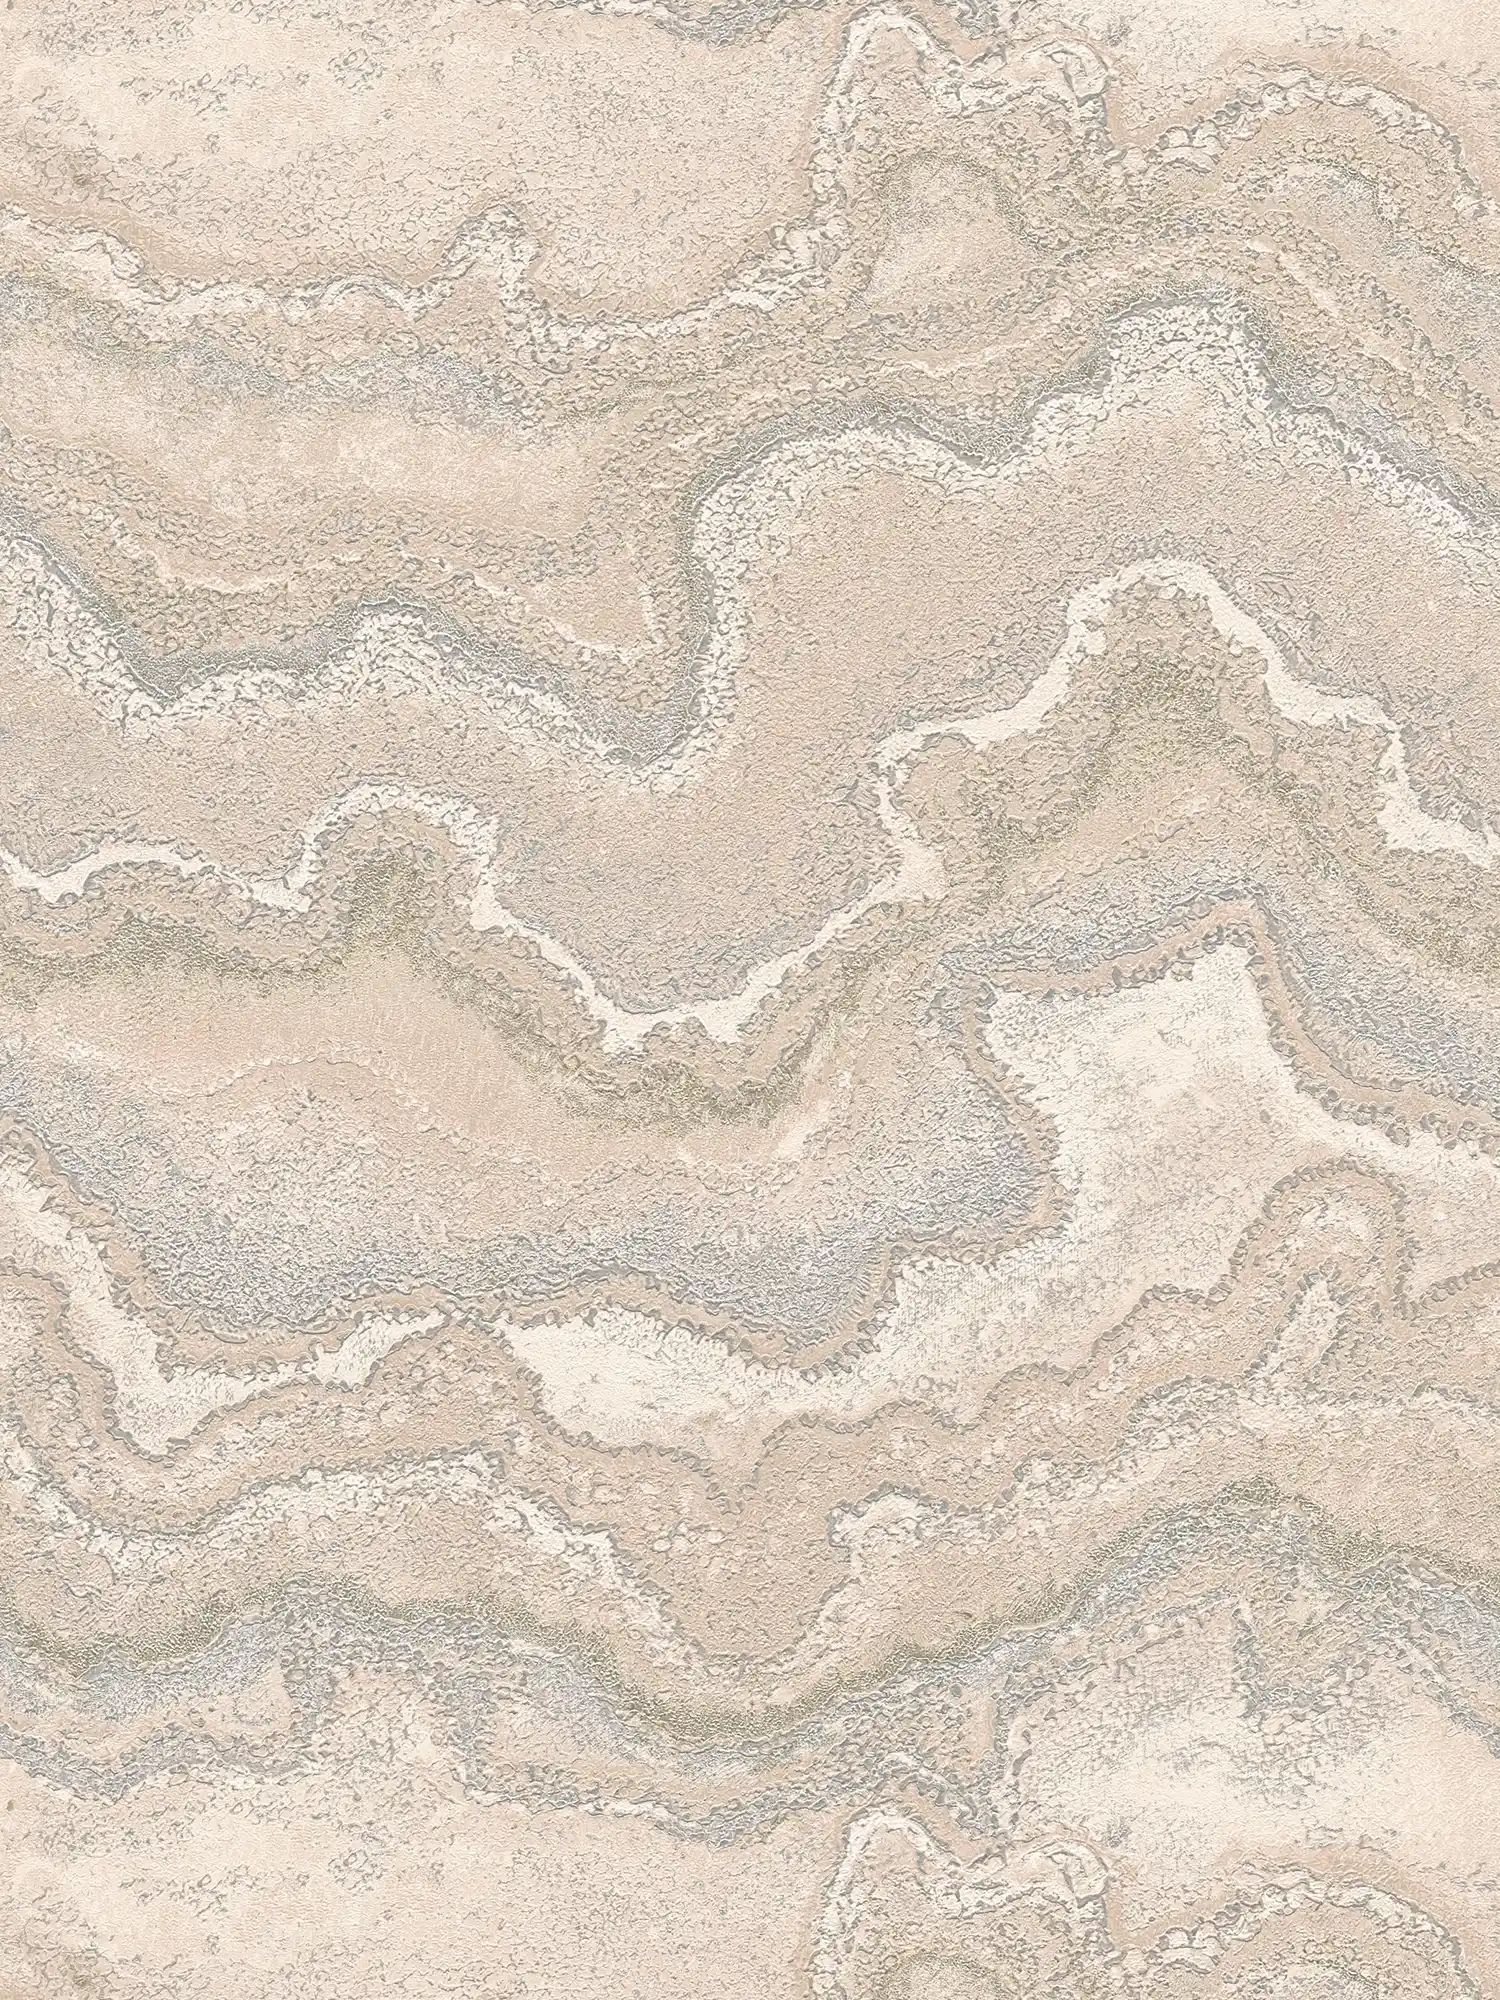 Non-woven wallpaper with textured marbling - beige, cream, silver
